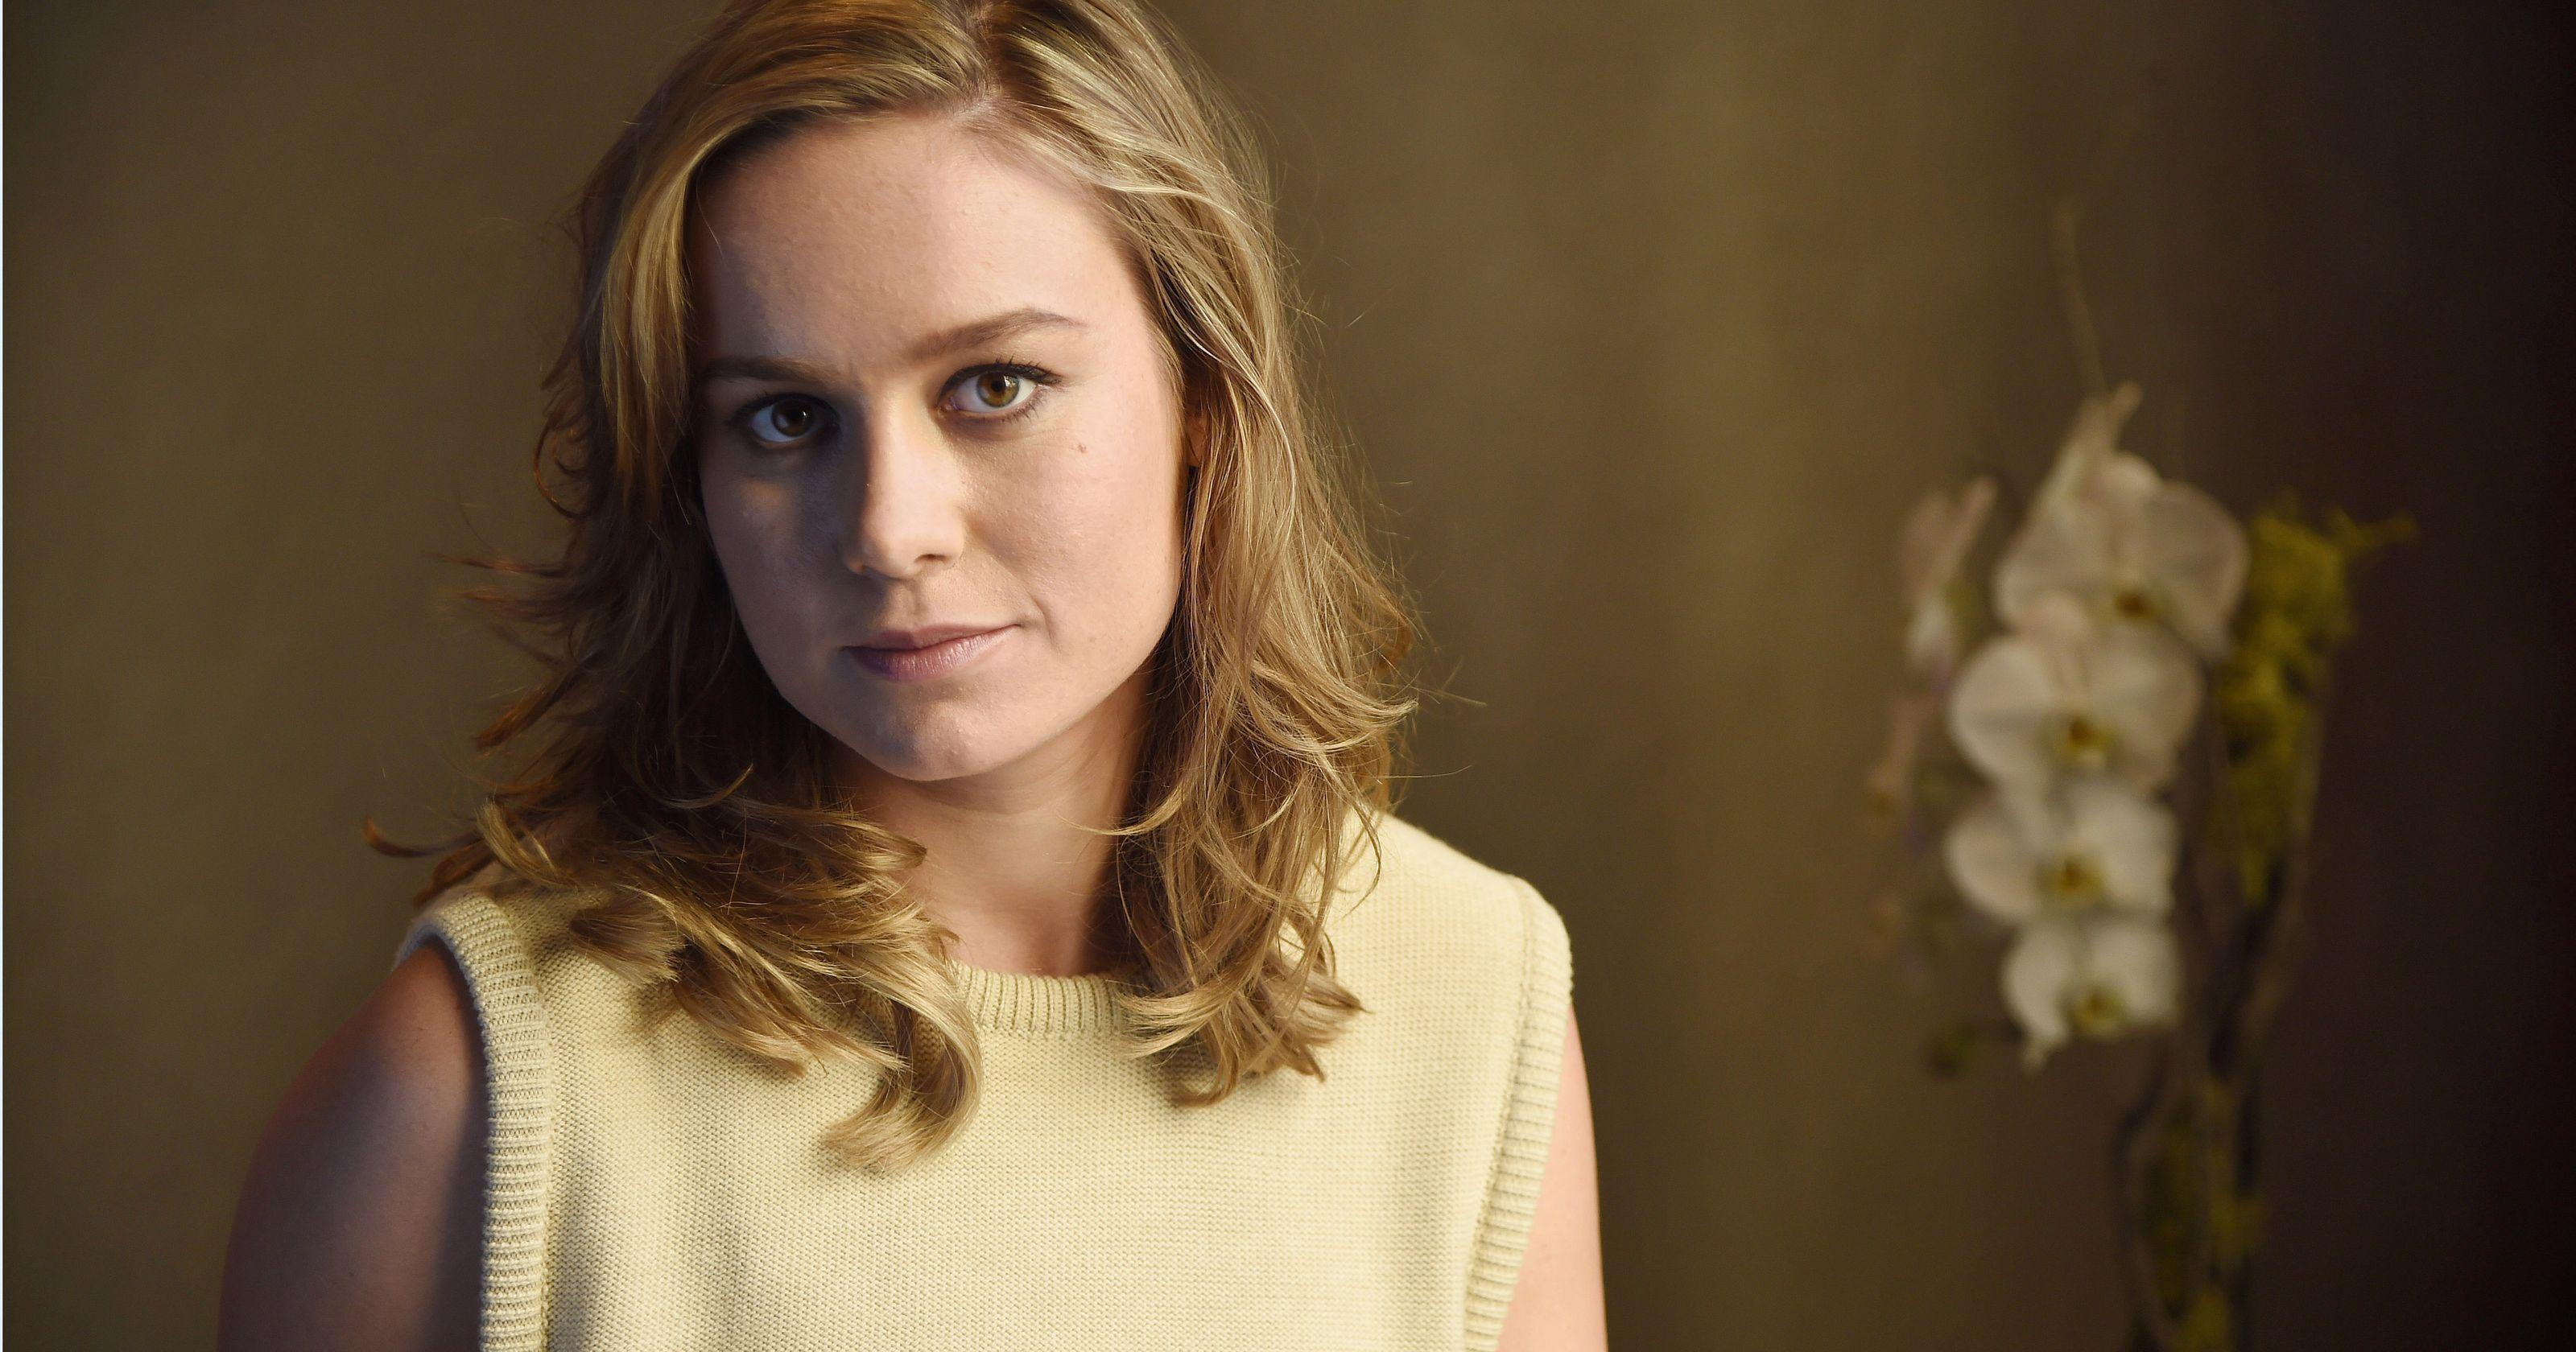 Brie Larson Wallpaper High Resolution and Quality Download